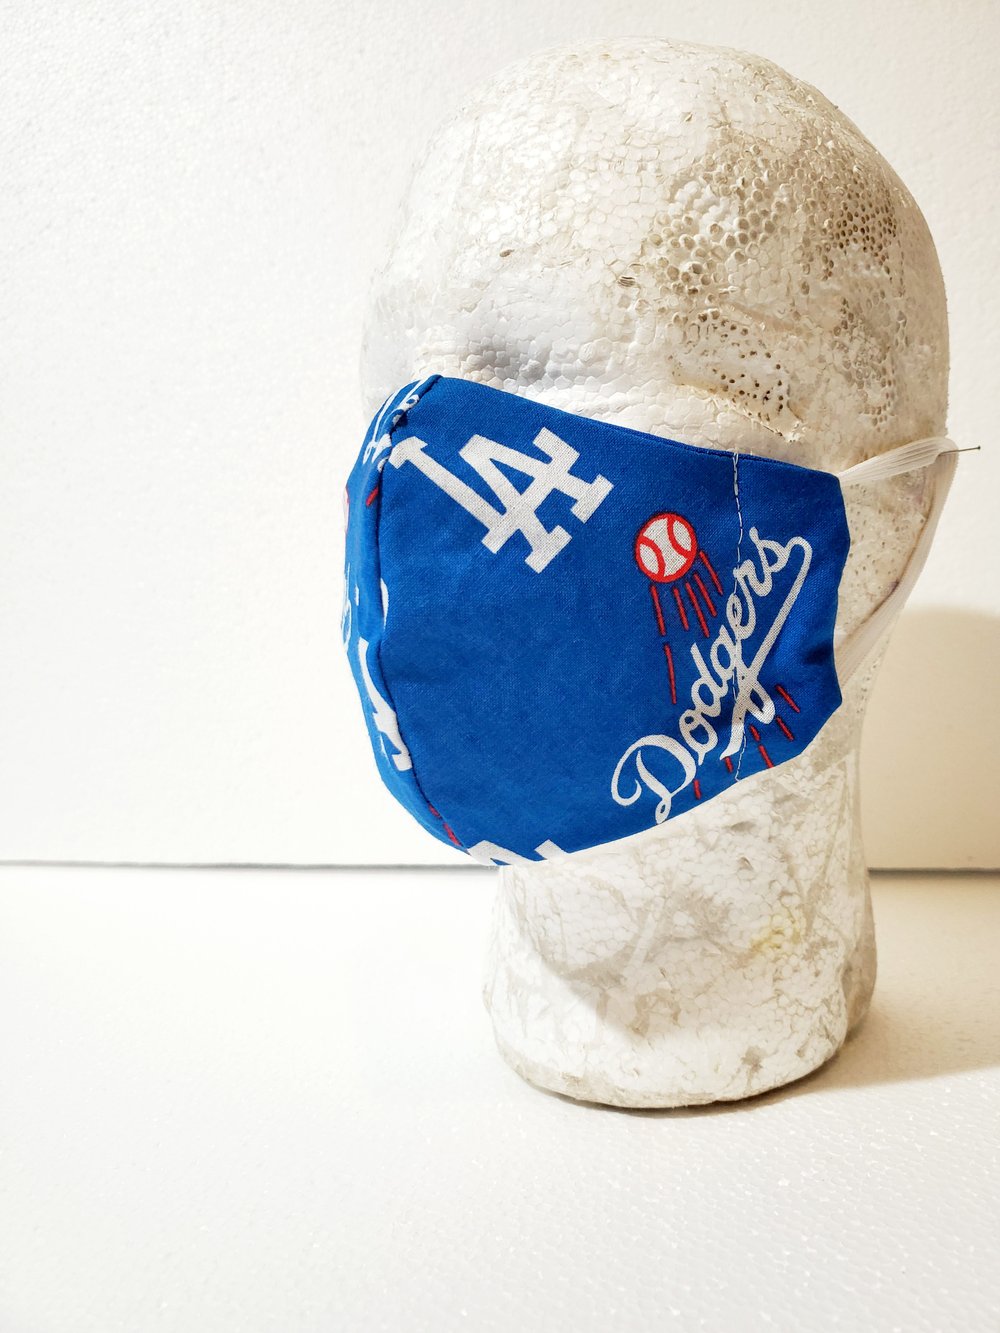 Los Angeles Dodgers Face Mask